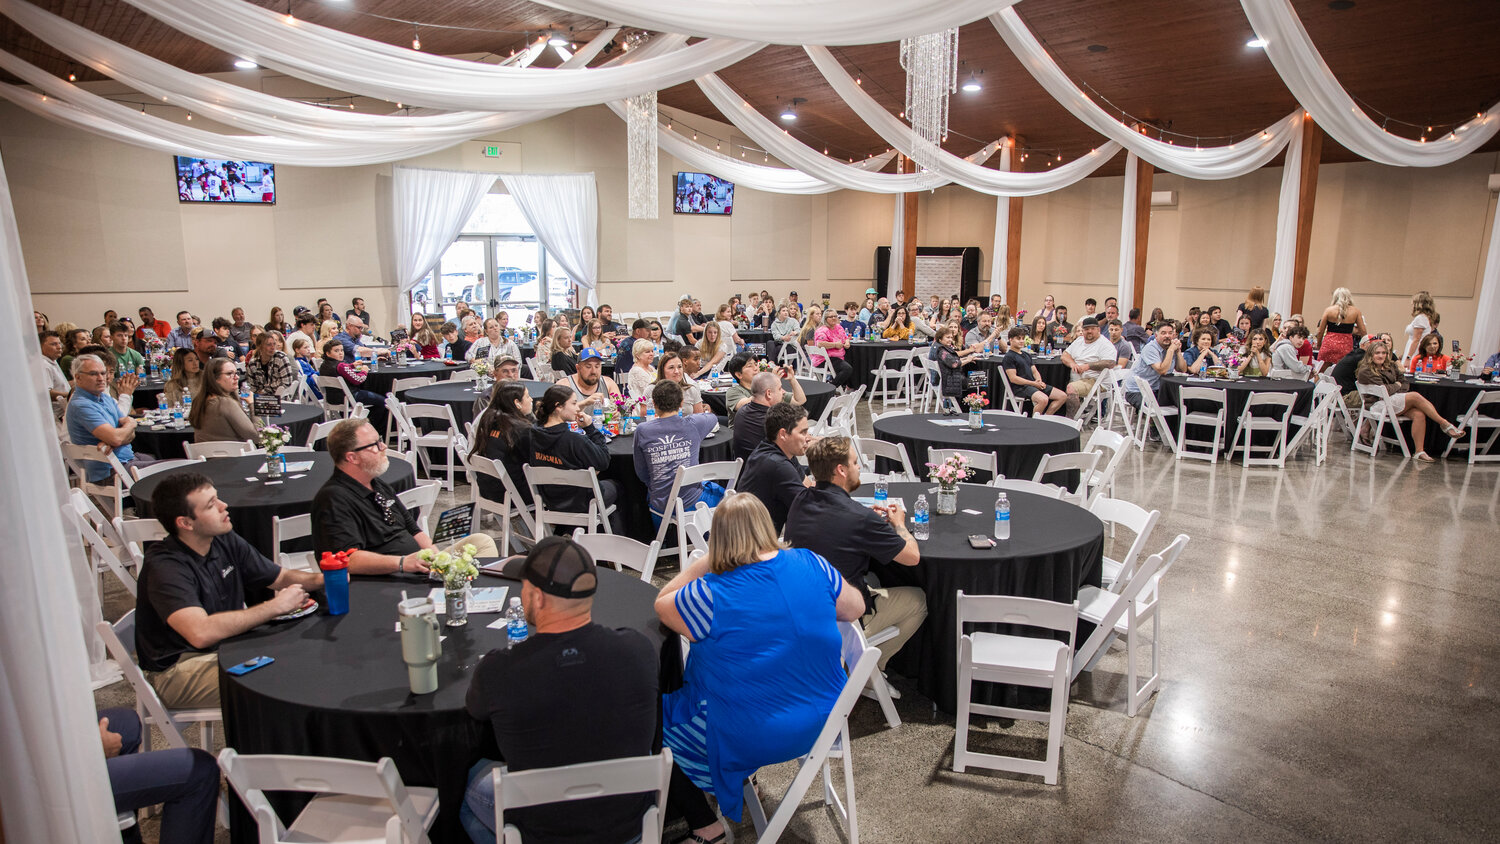 Attendees gather for the “Athletes of the Year” banquet at the Jester Auto Museum in Chehalis on Tuesday, May 30.